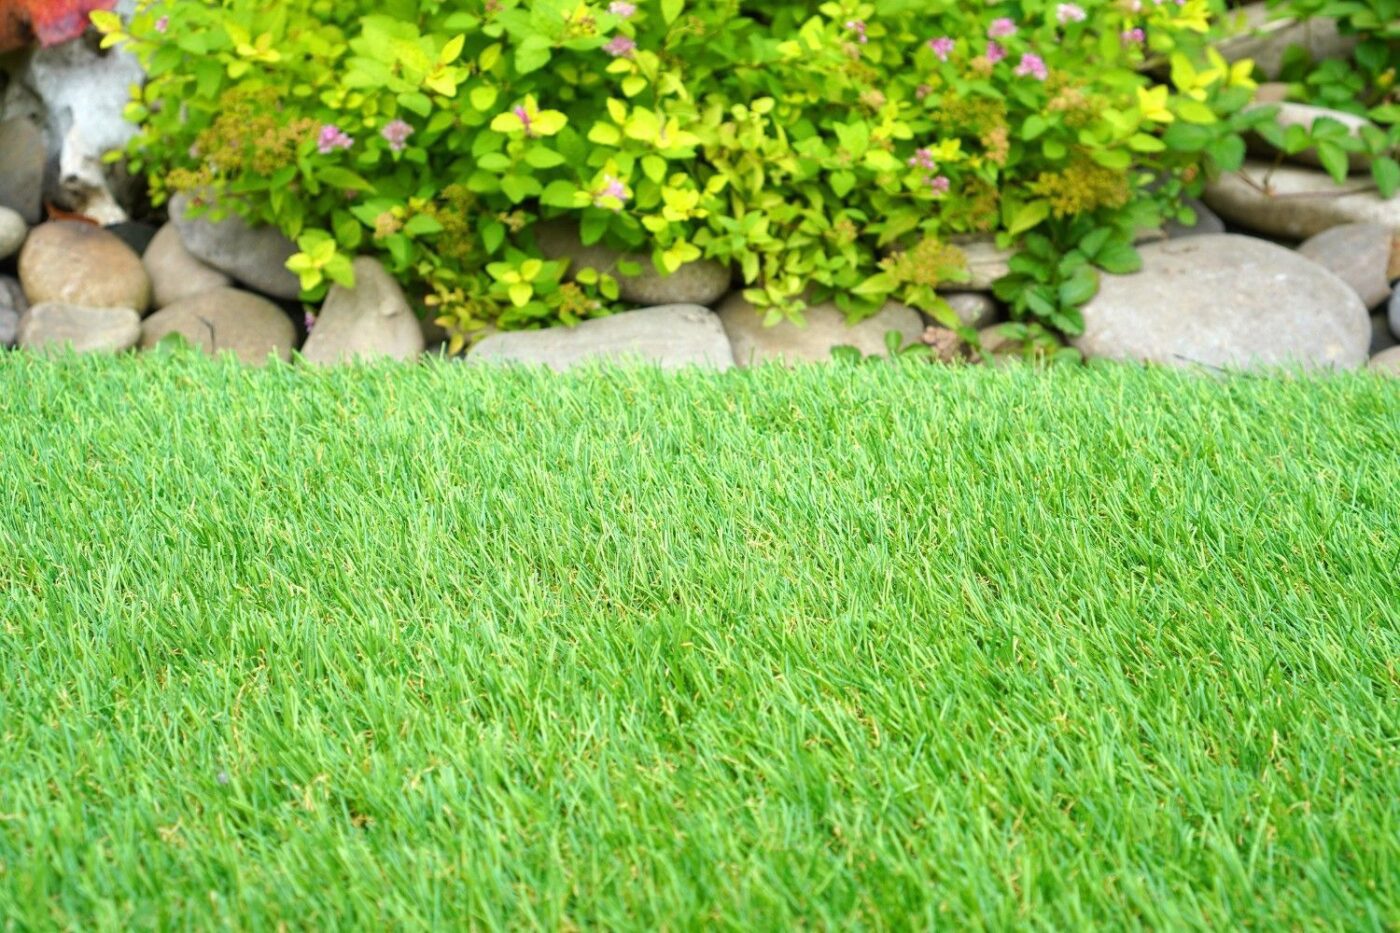 A close-up of a well-maintained patch of green grass bordered by a line of smooth, round stones. Behind the stones, there is a variety of vibrant green and yellow leafy plants interspersed with small pink flowers—an ideal outdoor space upgrade for St. Johns FL homeowners.